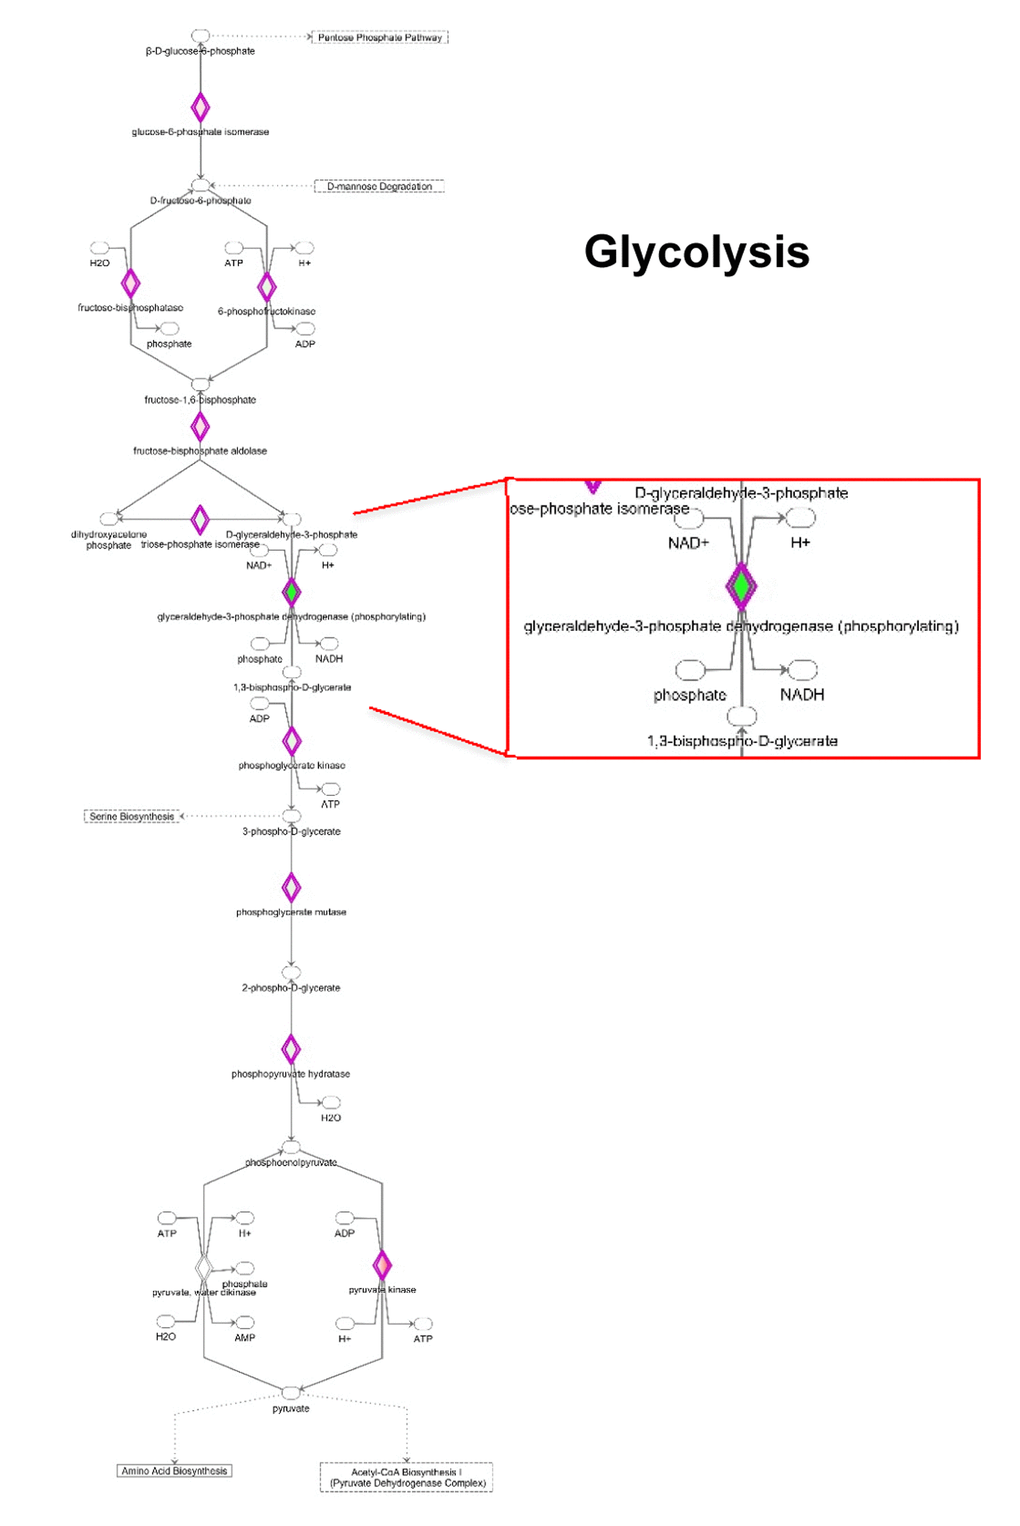 Modifications in the expression of glycolytic enzymes. Schematic representation of glucose metabolism upon MGT treatment. Green tea exposure causes an evident impairment of glycolytic pathway. Proteins down-regulated (in green) or up-regulated (in red) are shown.